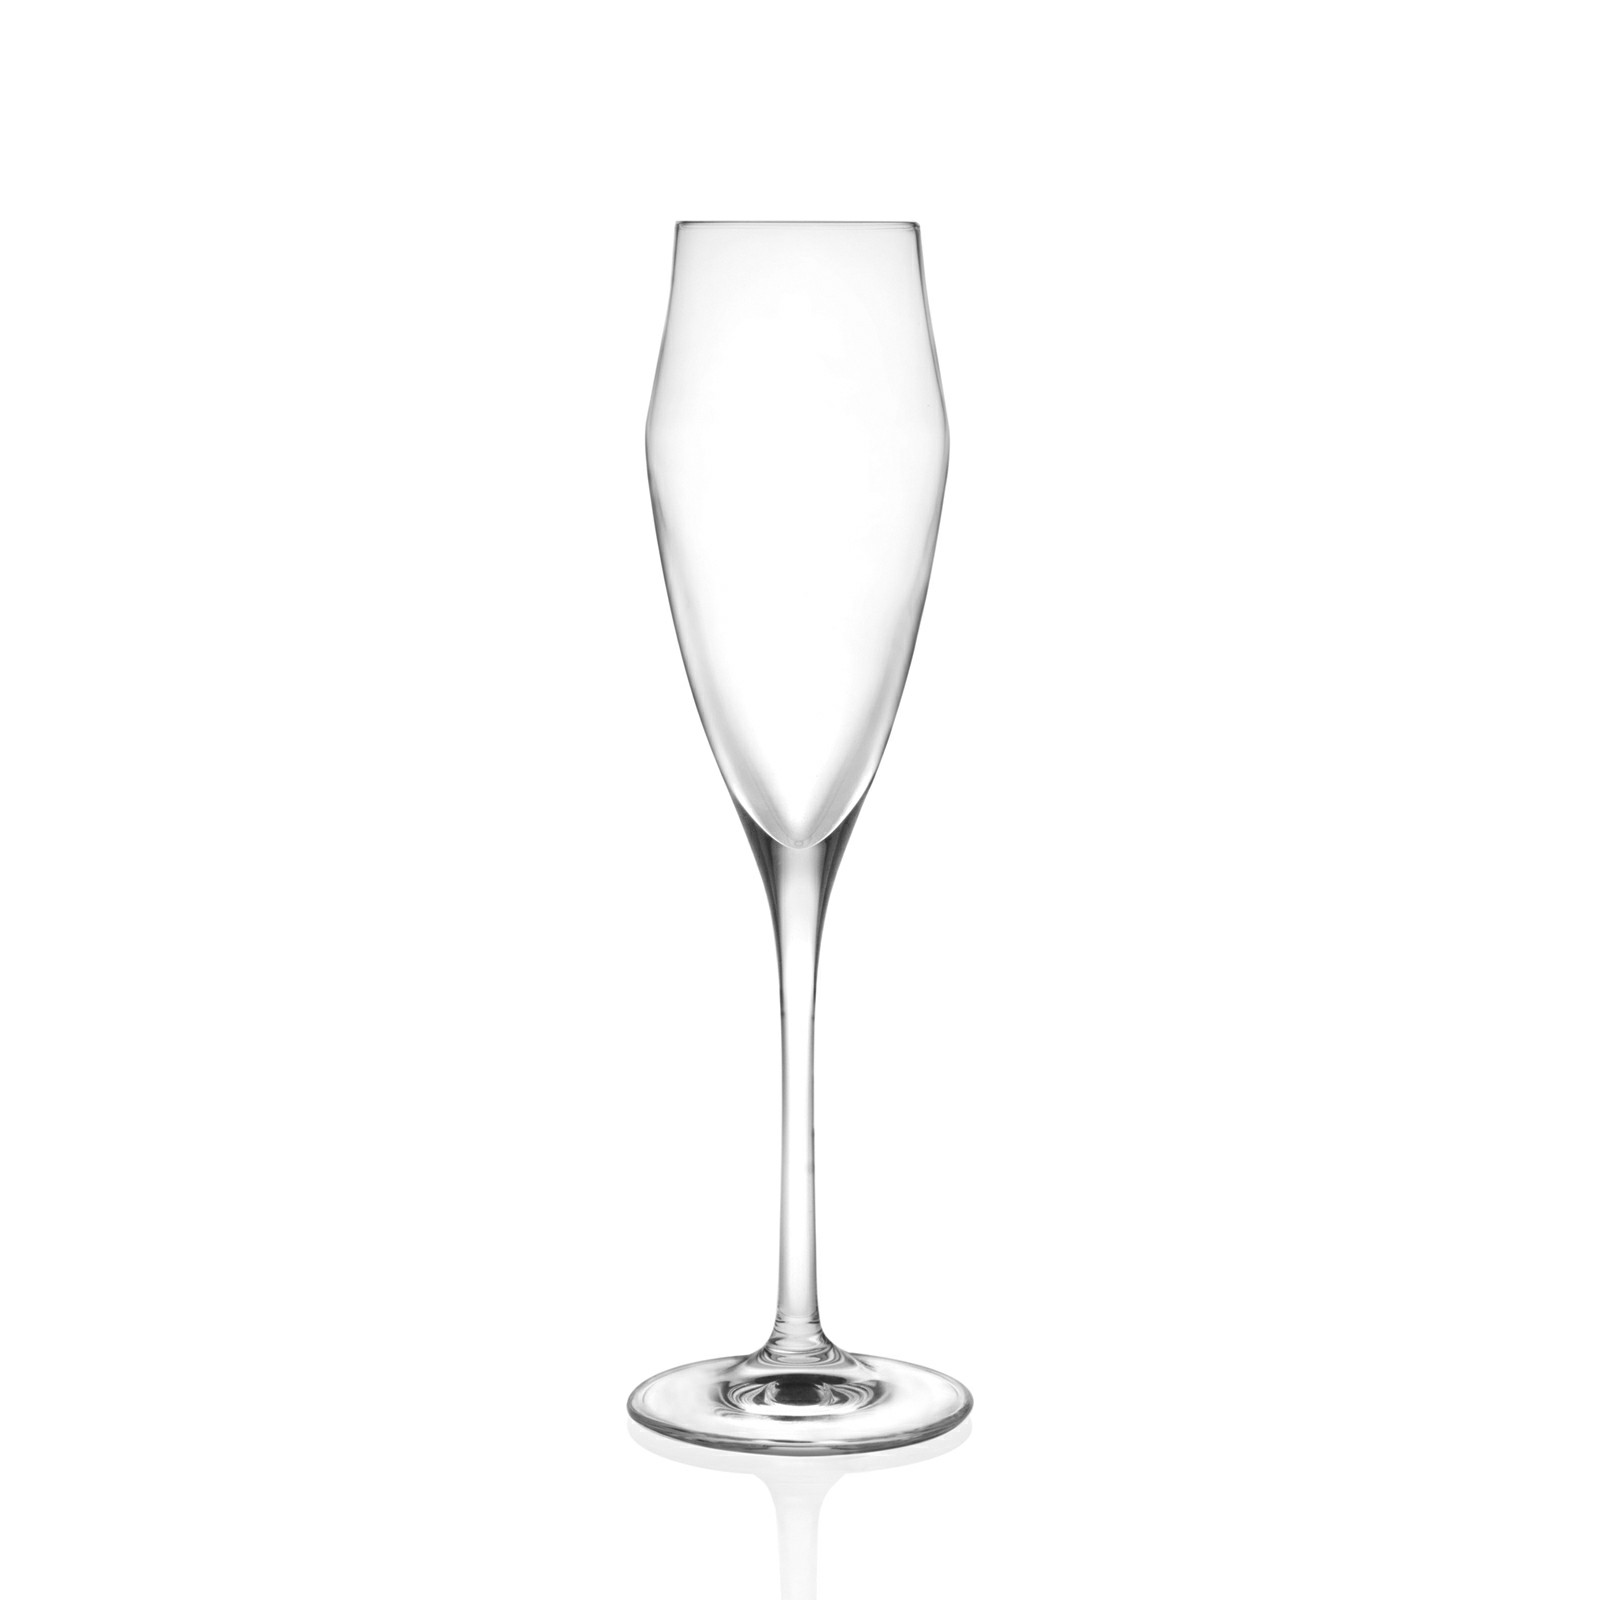 EGO CHAMPAGNE FLUTE GLASS 180ML RCR Italy